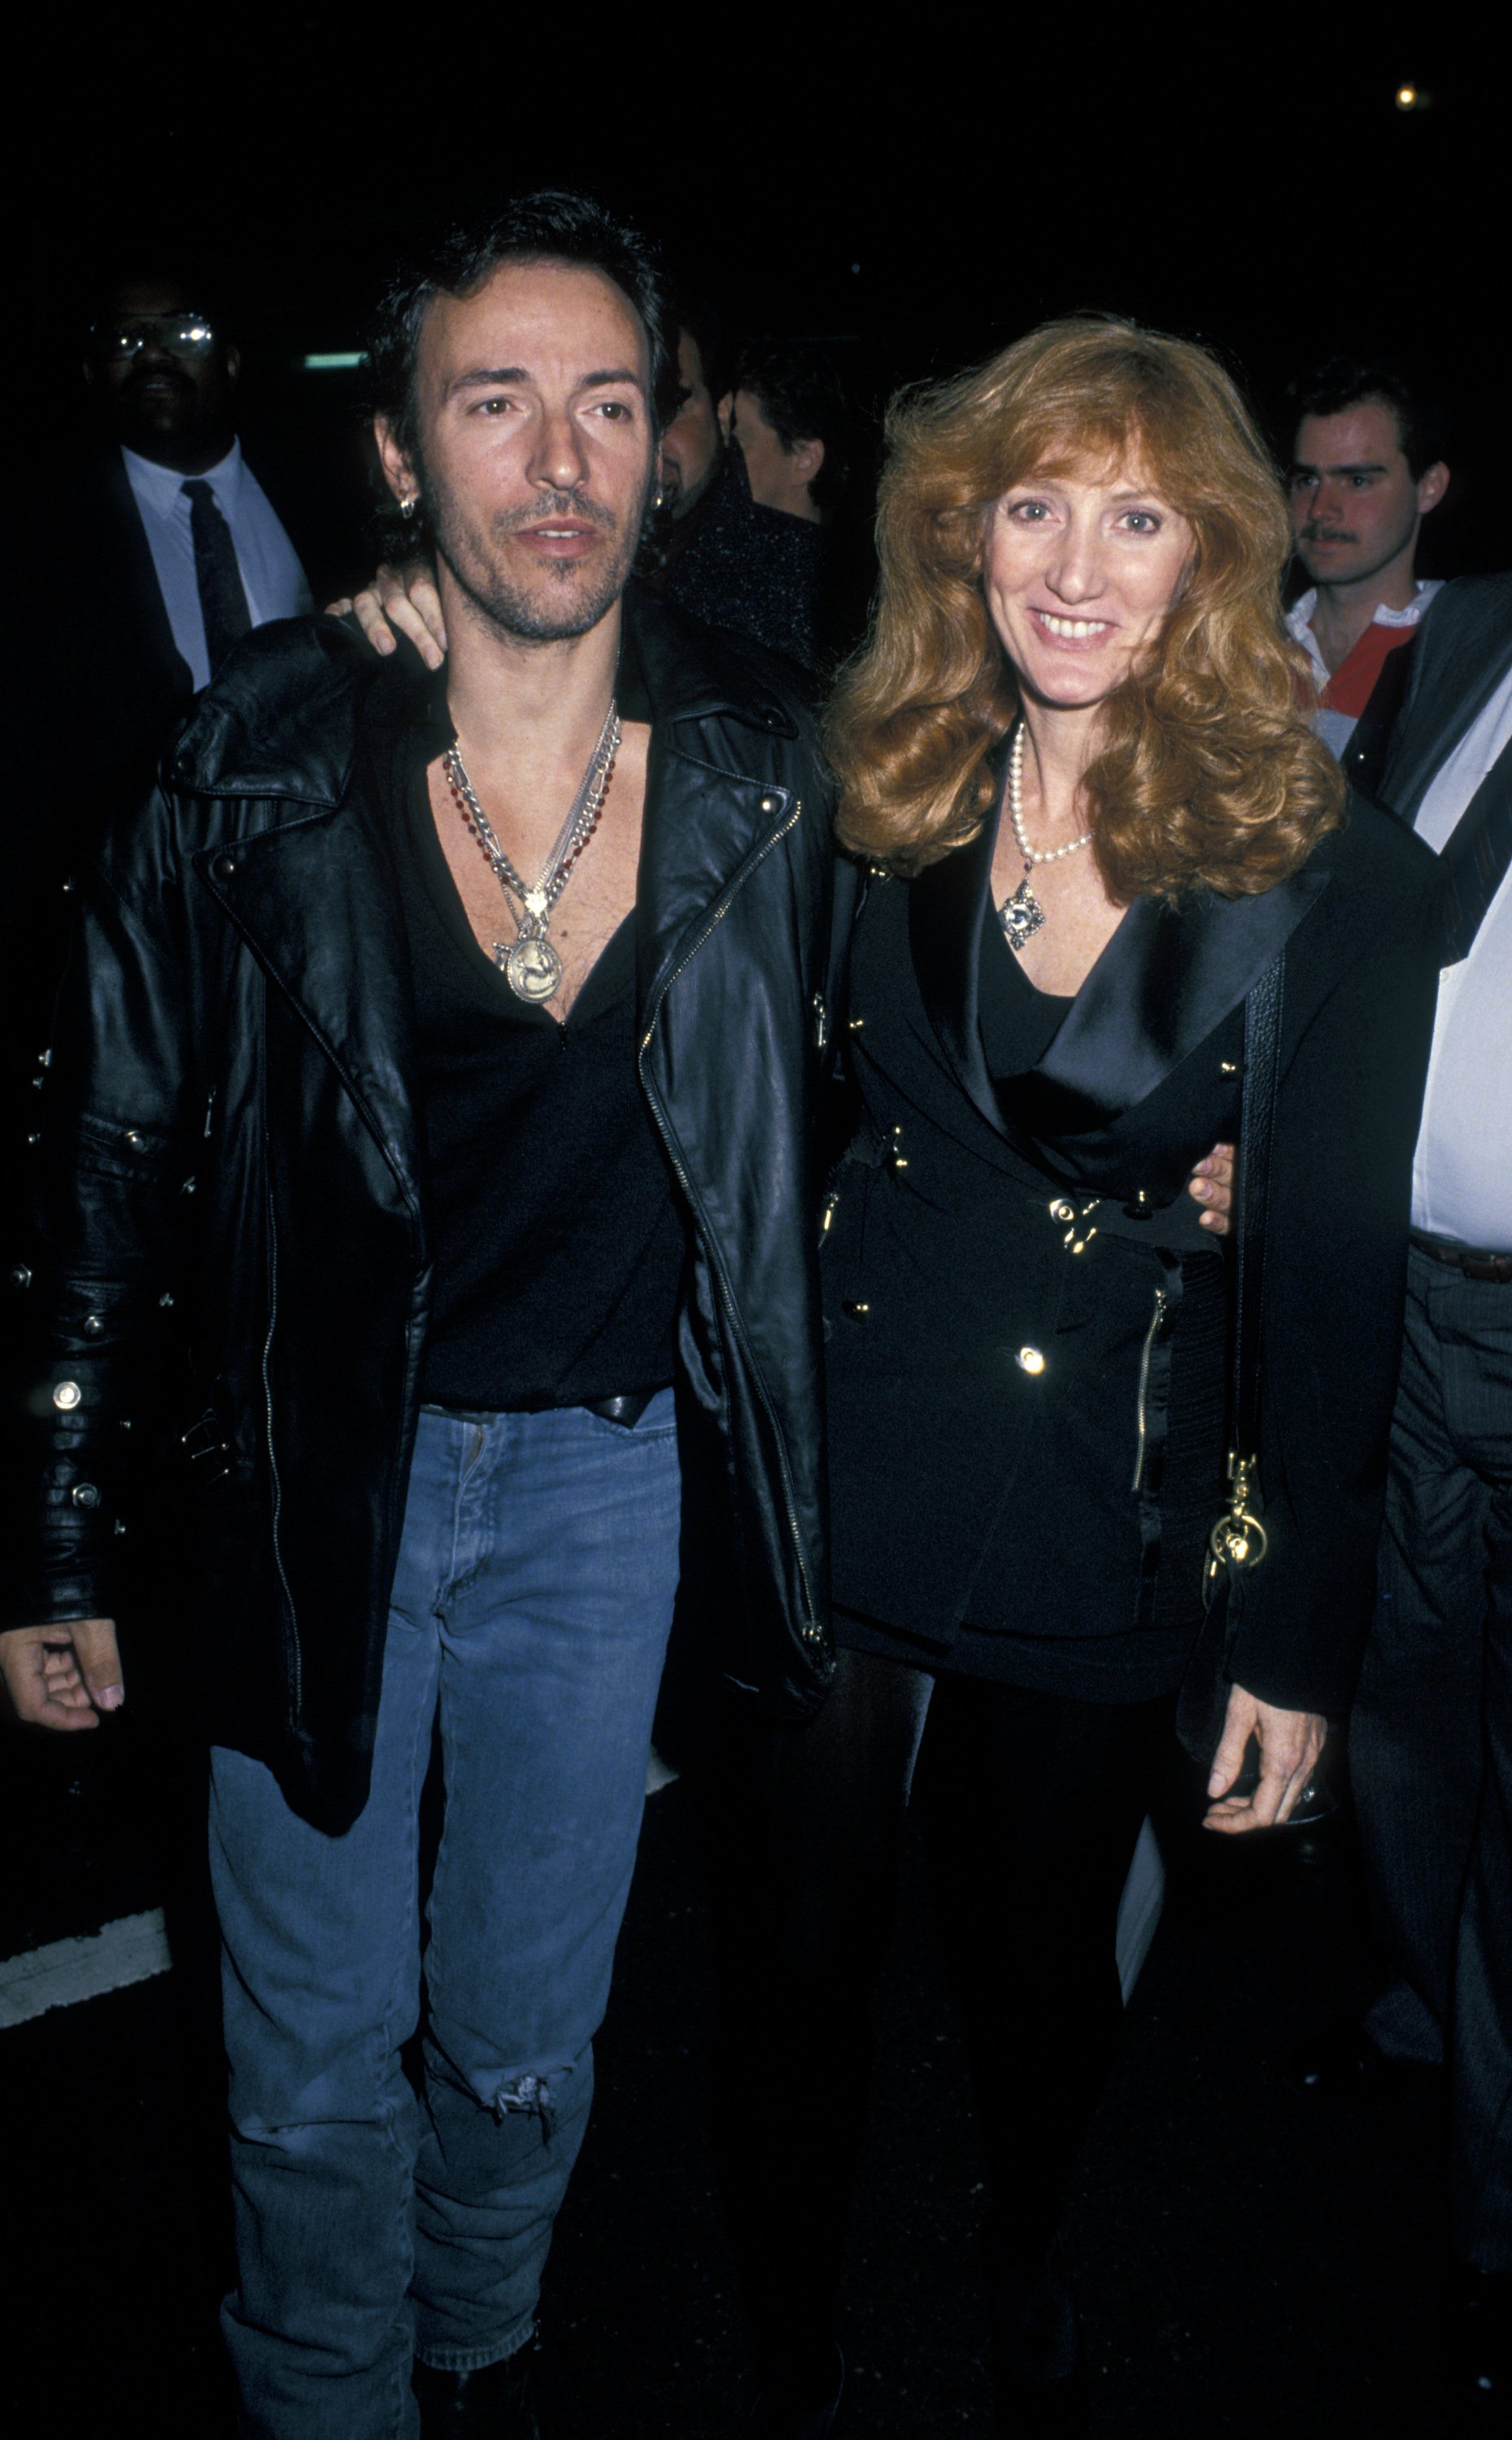 Bruce Springsteen and Patti Scialfa during Bruce Springsteen and Patti Scialfa Sighting at Sam's Restaurant in New York City - May 9, 1992 at Sam's Restaurant in New York City, New York, United States. | Source: Getty Images